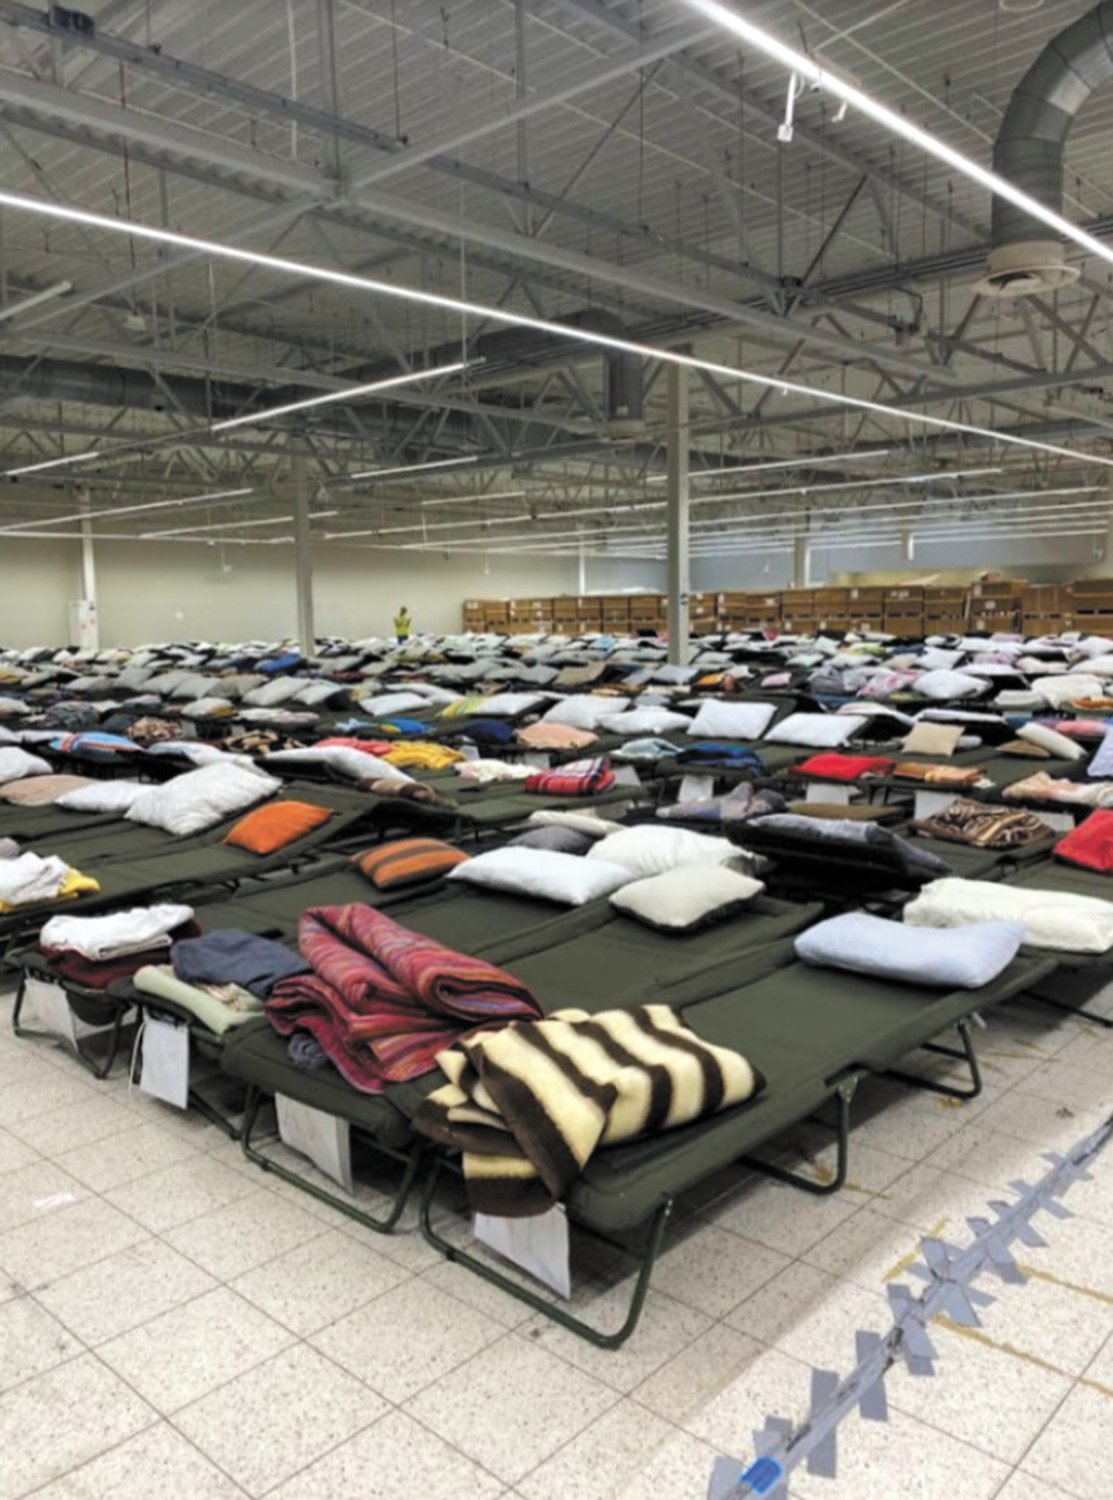 A SAFE PLACE TO STAY: Dane recently spent two weeks volunteering at a large shopping center in Przemysl, Poland, that was converted into a humanitarian center where Ukrainian refugees temporarily stayed after crossing the Medyka border. (Submitted photo)